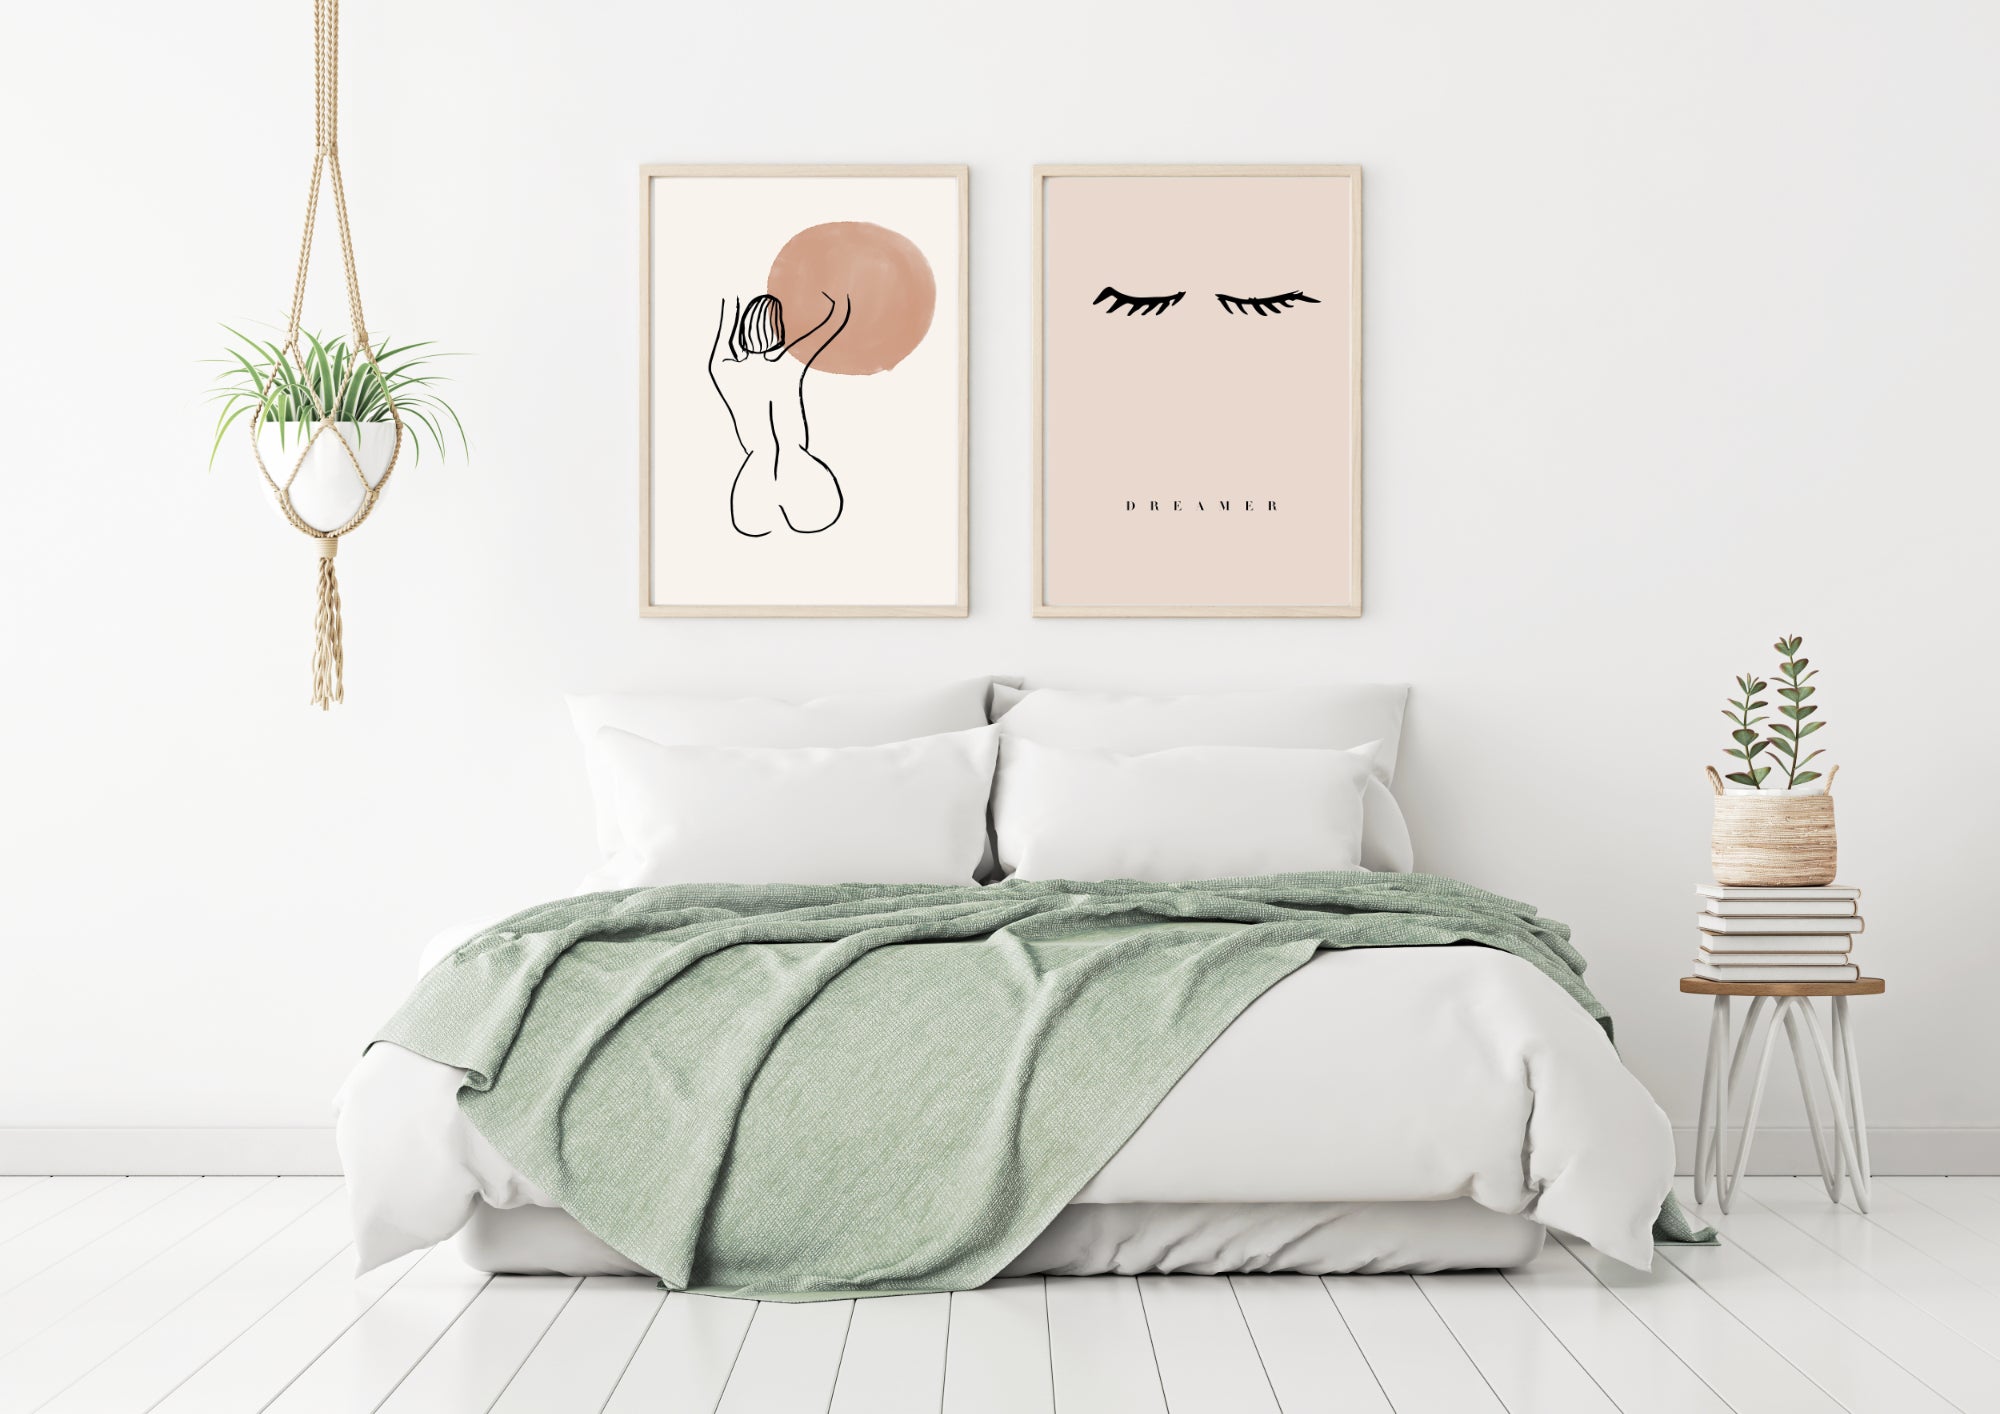 Art for interior designers - two art prints in a bedroom setting